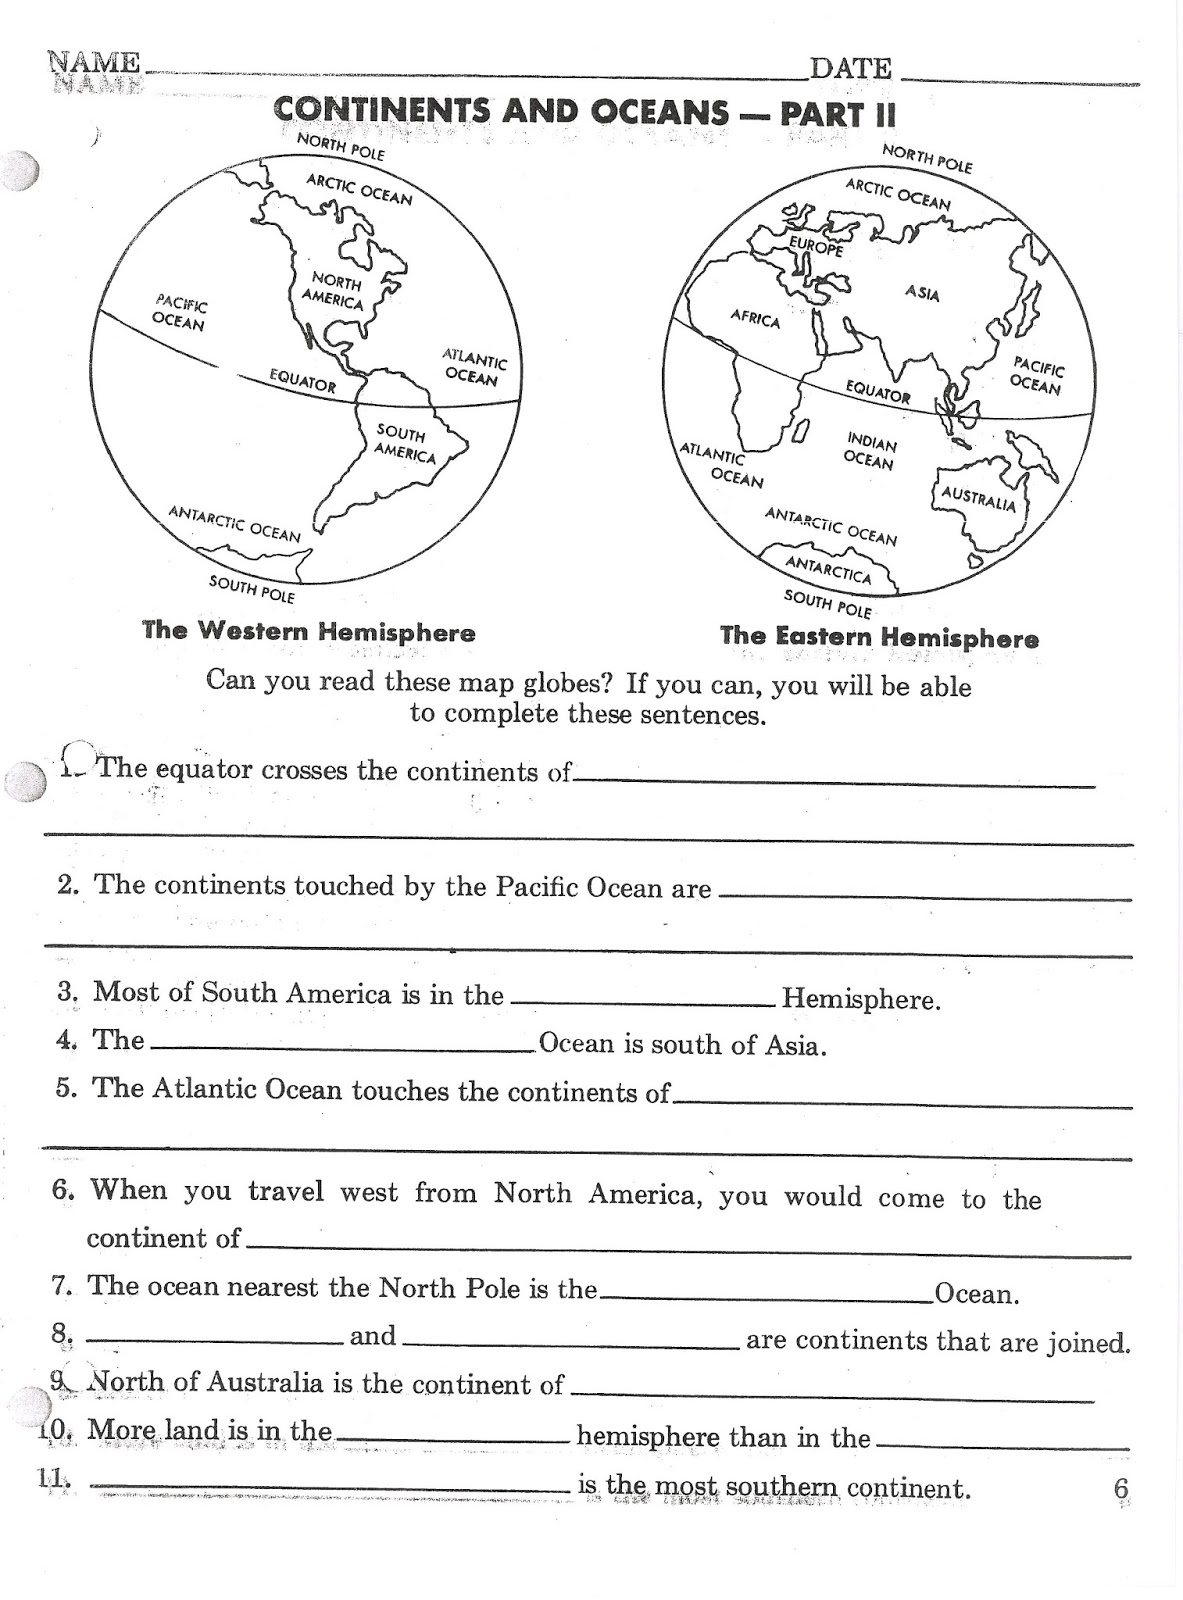 Oceans and Continents Quiz Printable